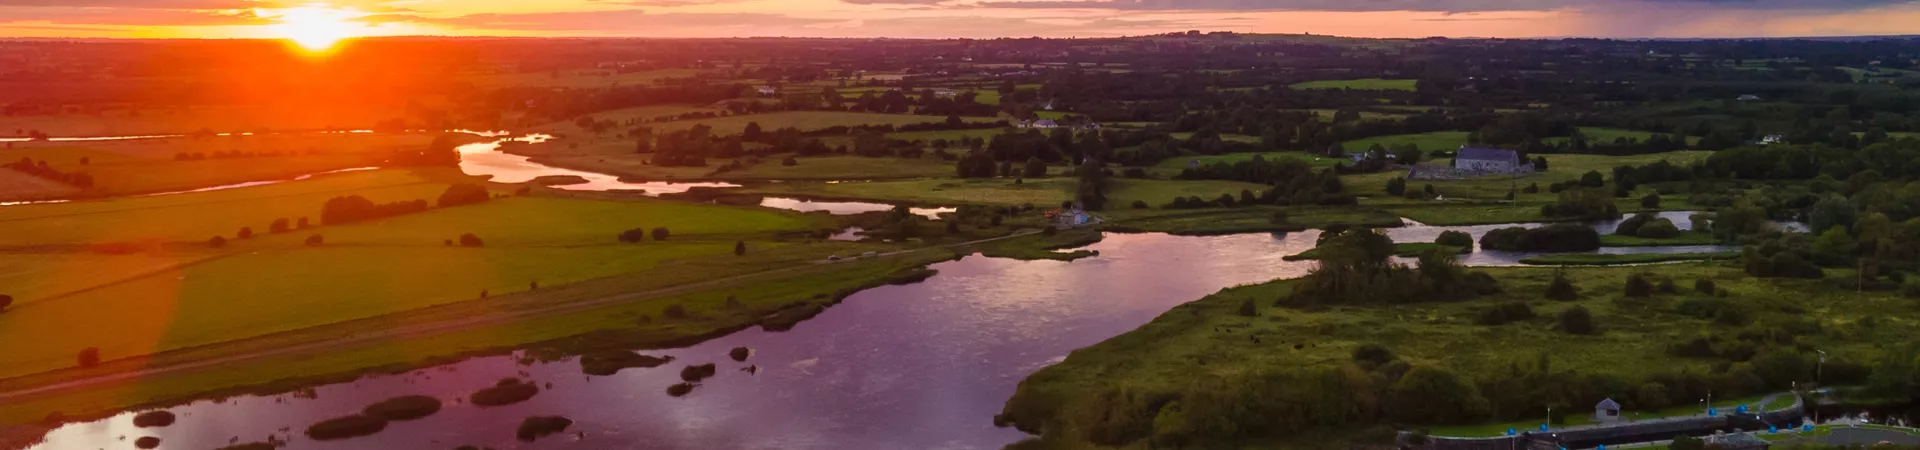 Meelick Weir Walkway on River Shannon by sunset